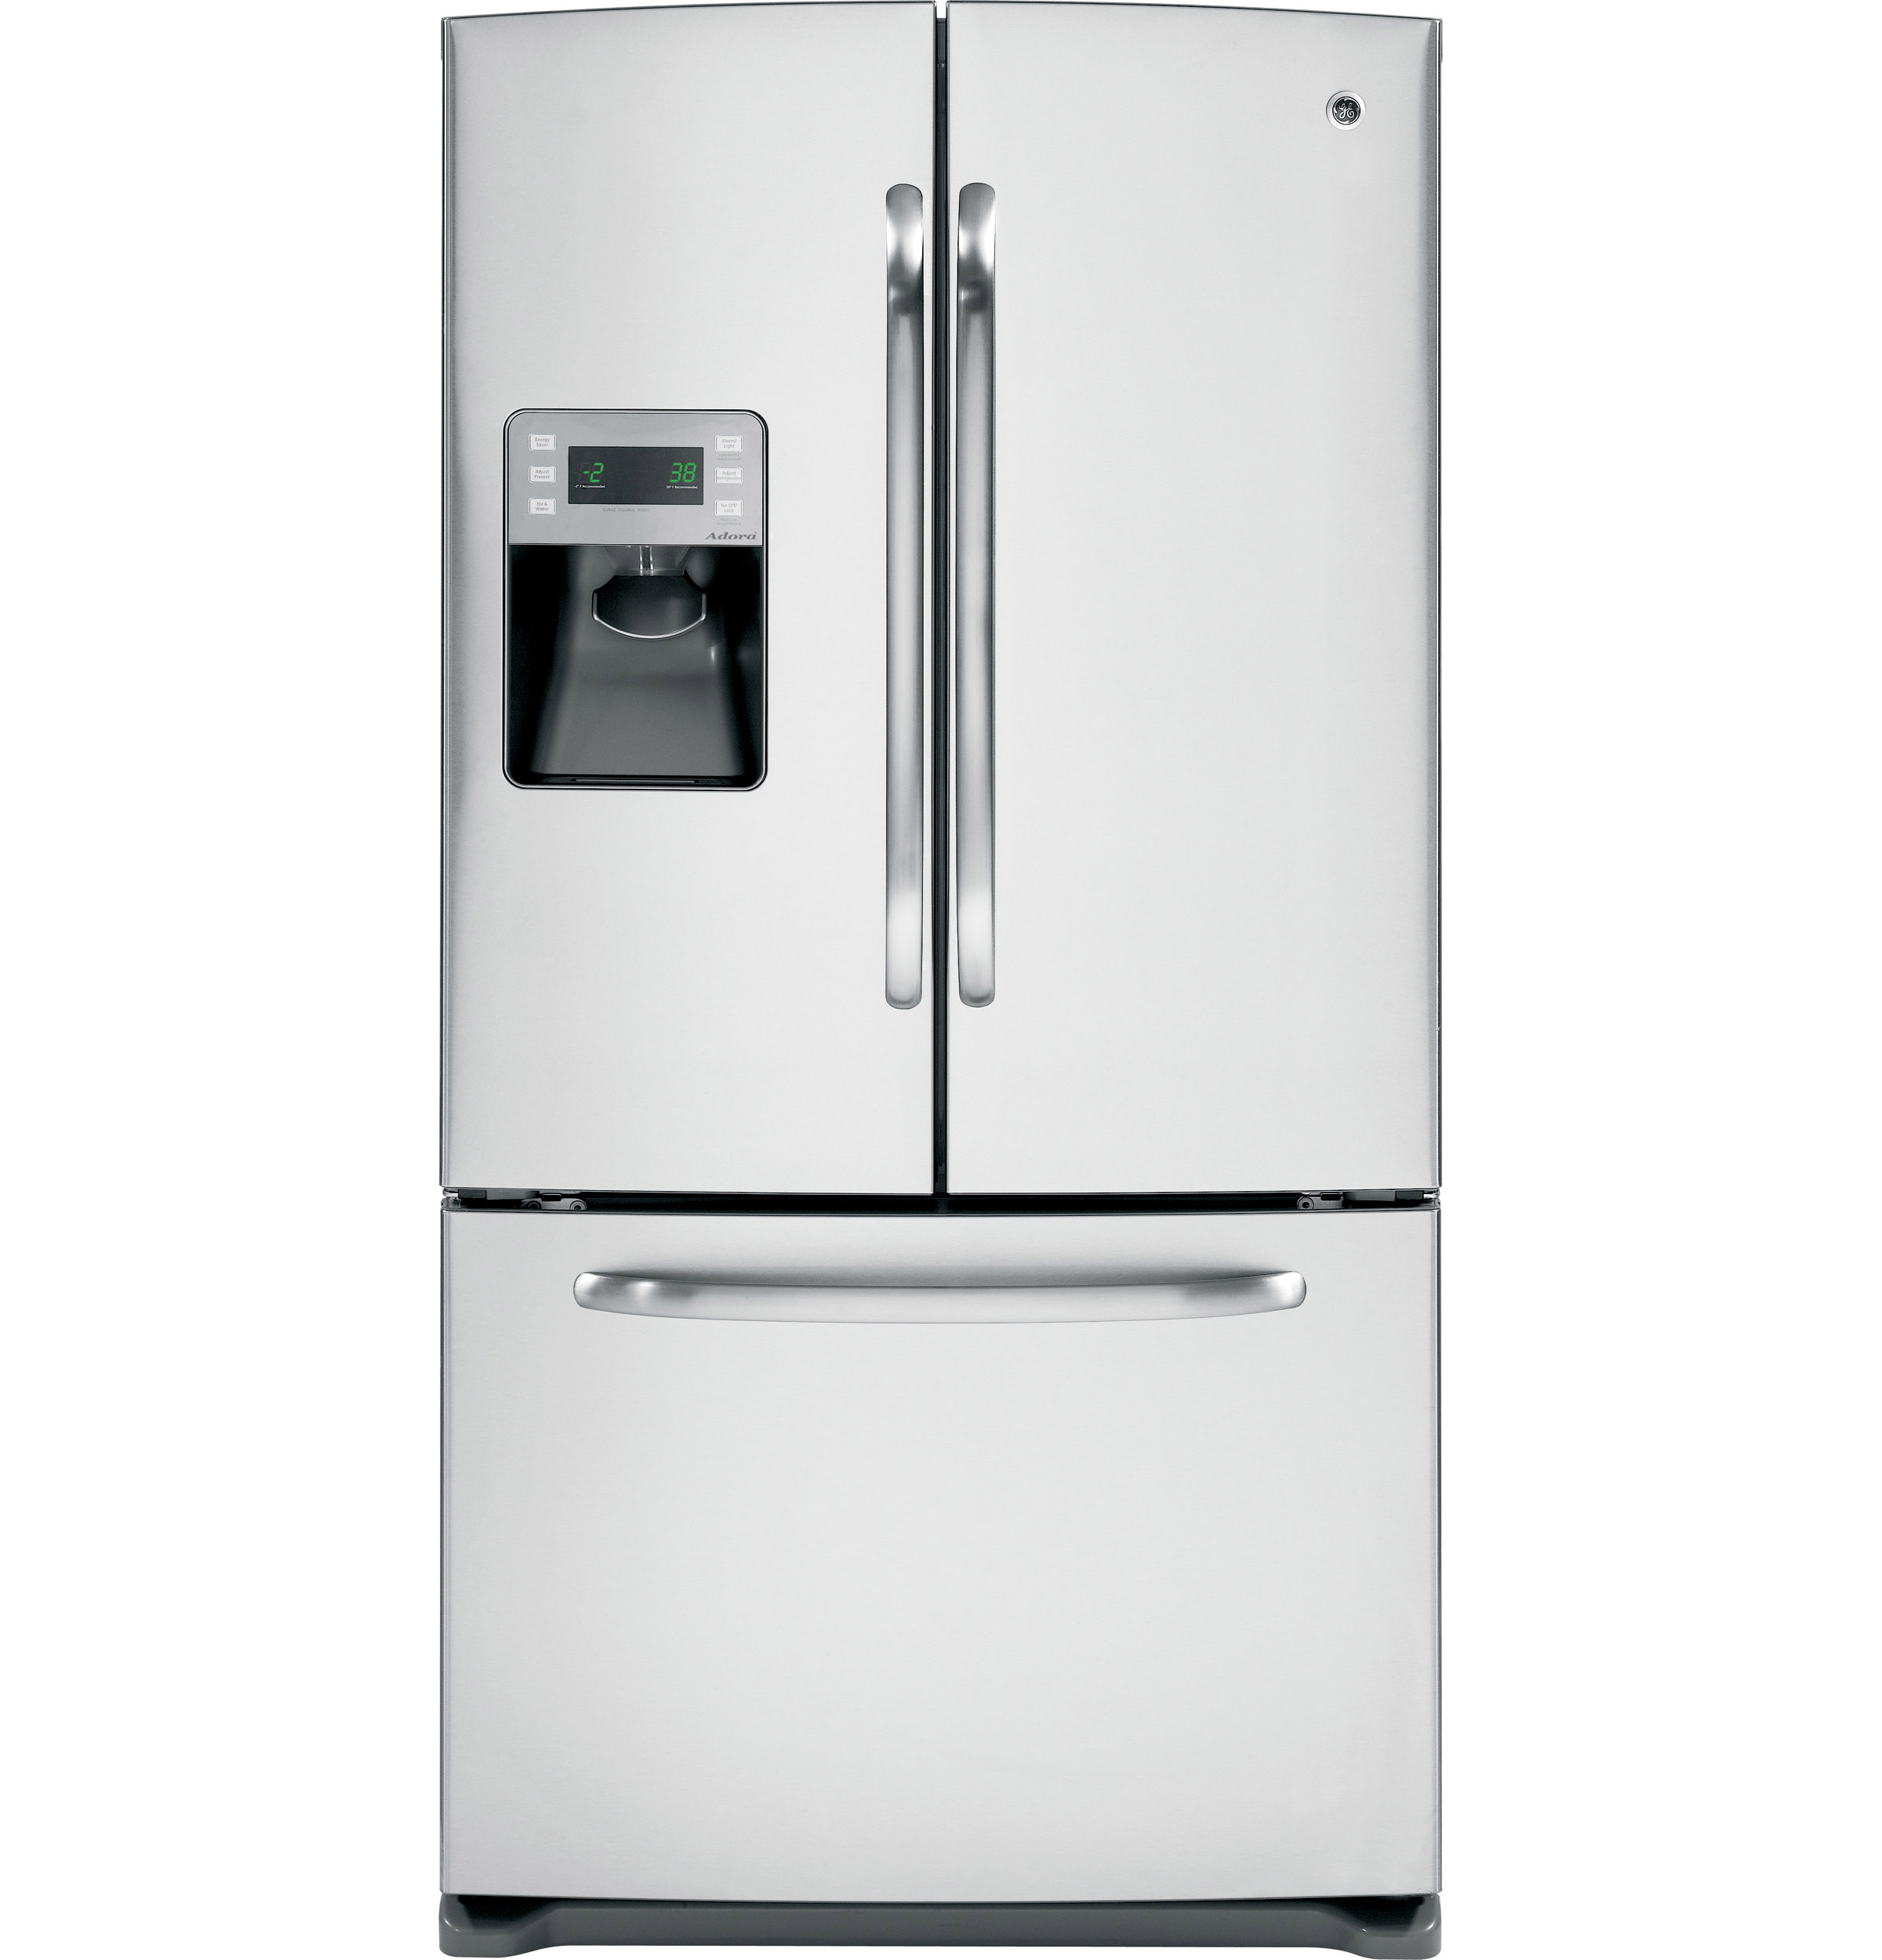 GE® ENERGY STAR® 25.9 Cu. Ft. French-Door Refrigerator with Icemaker